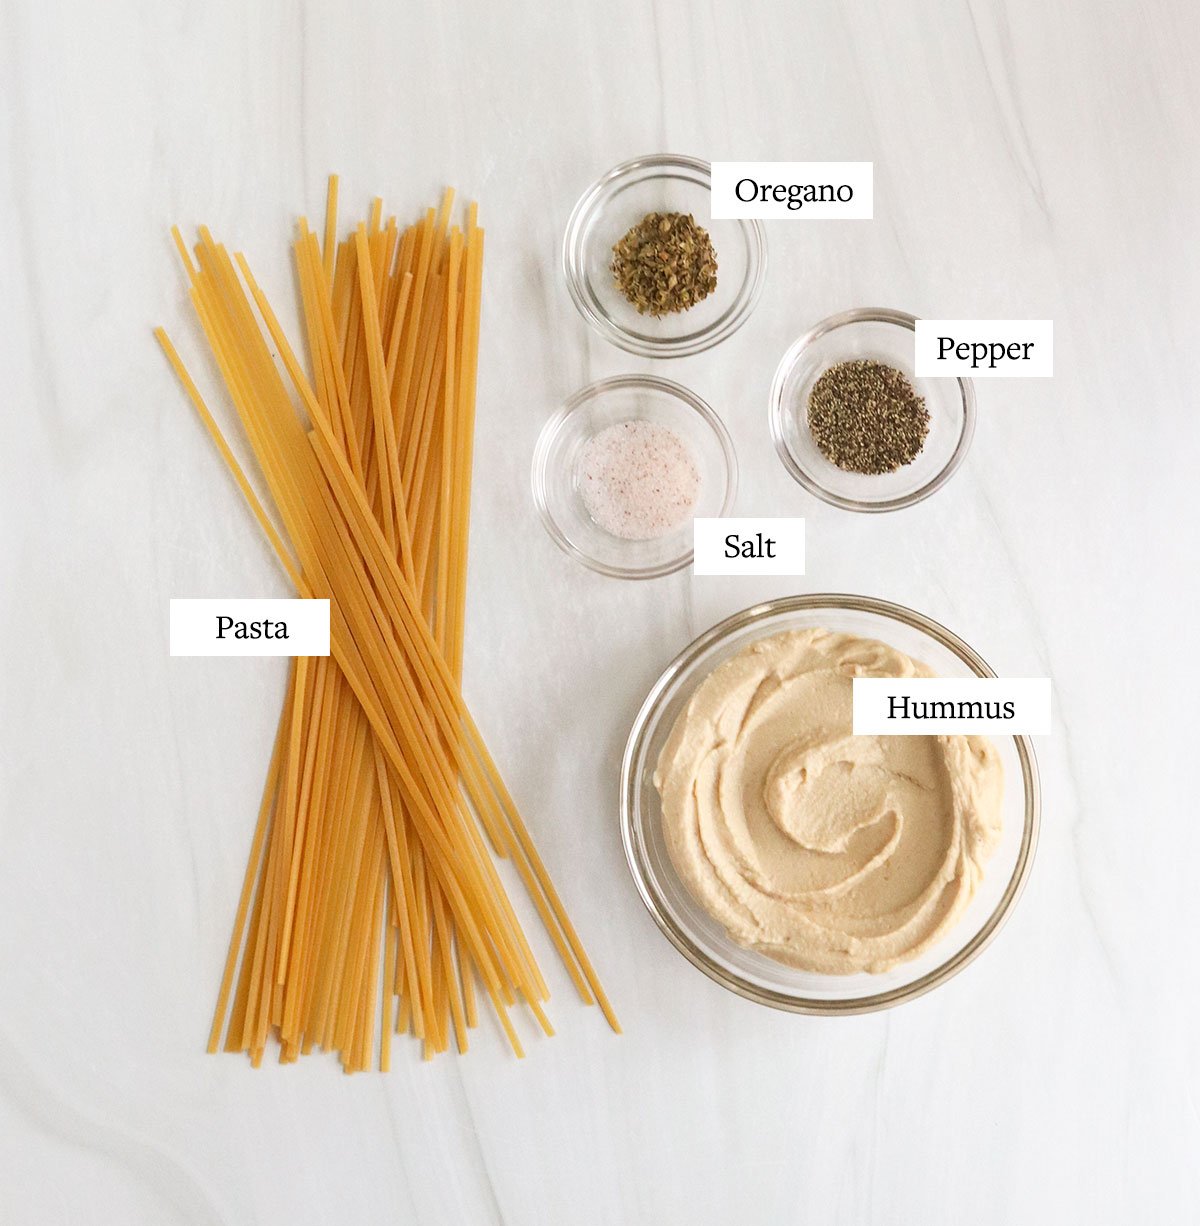 ingredients for hummus pasta labeled on a white surface.